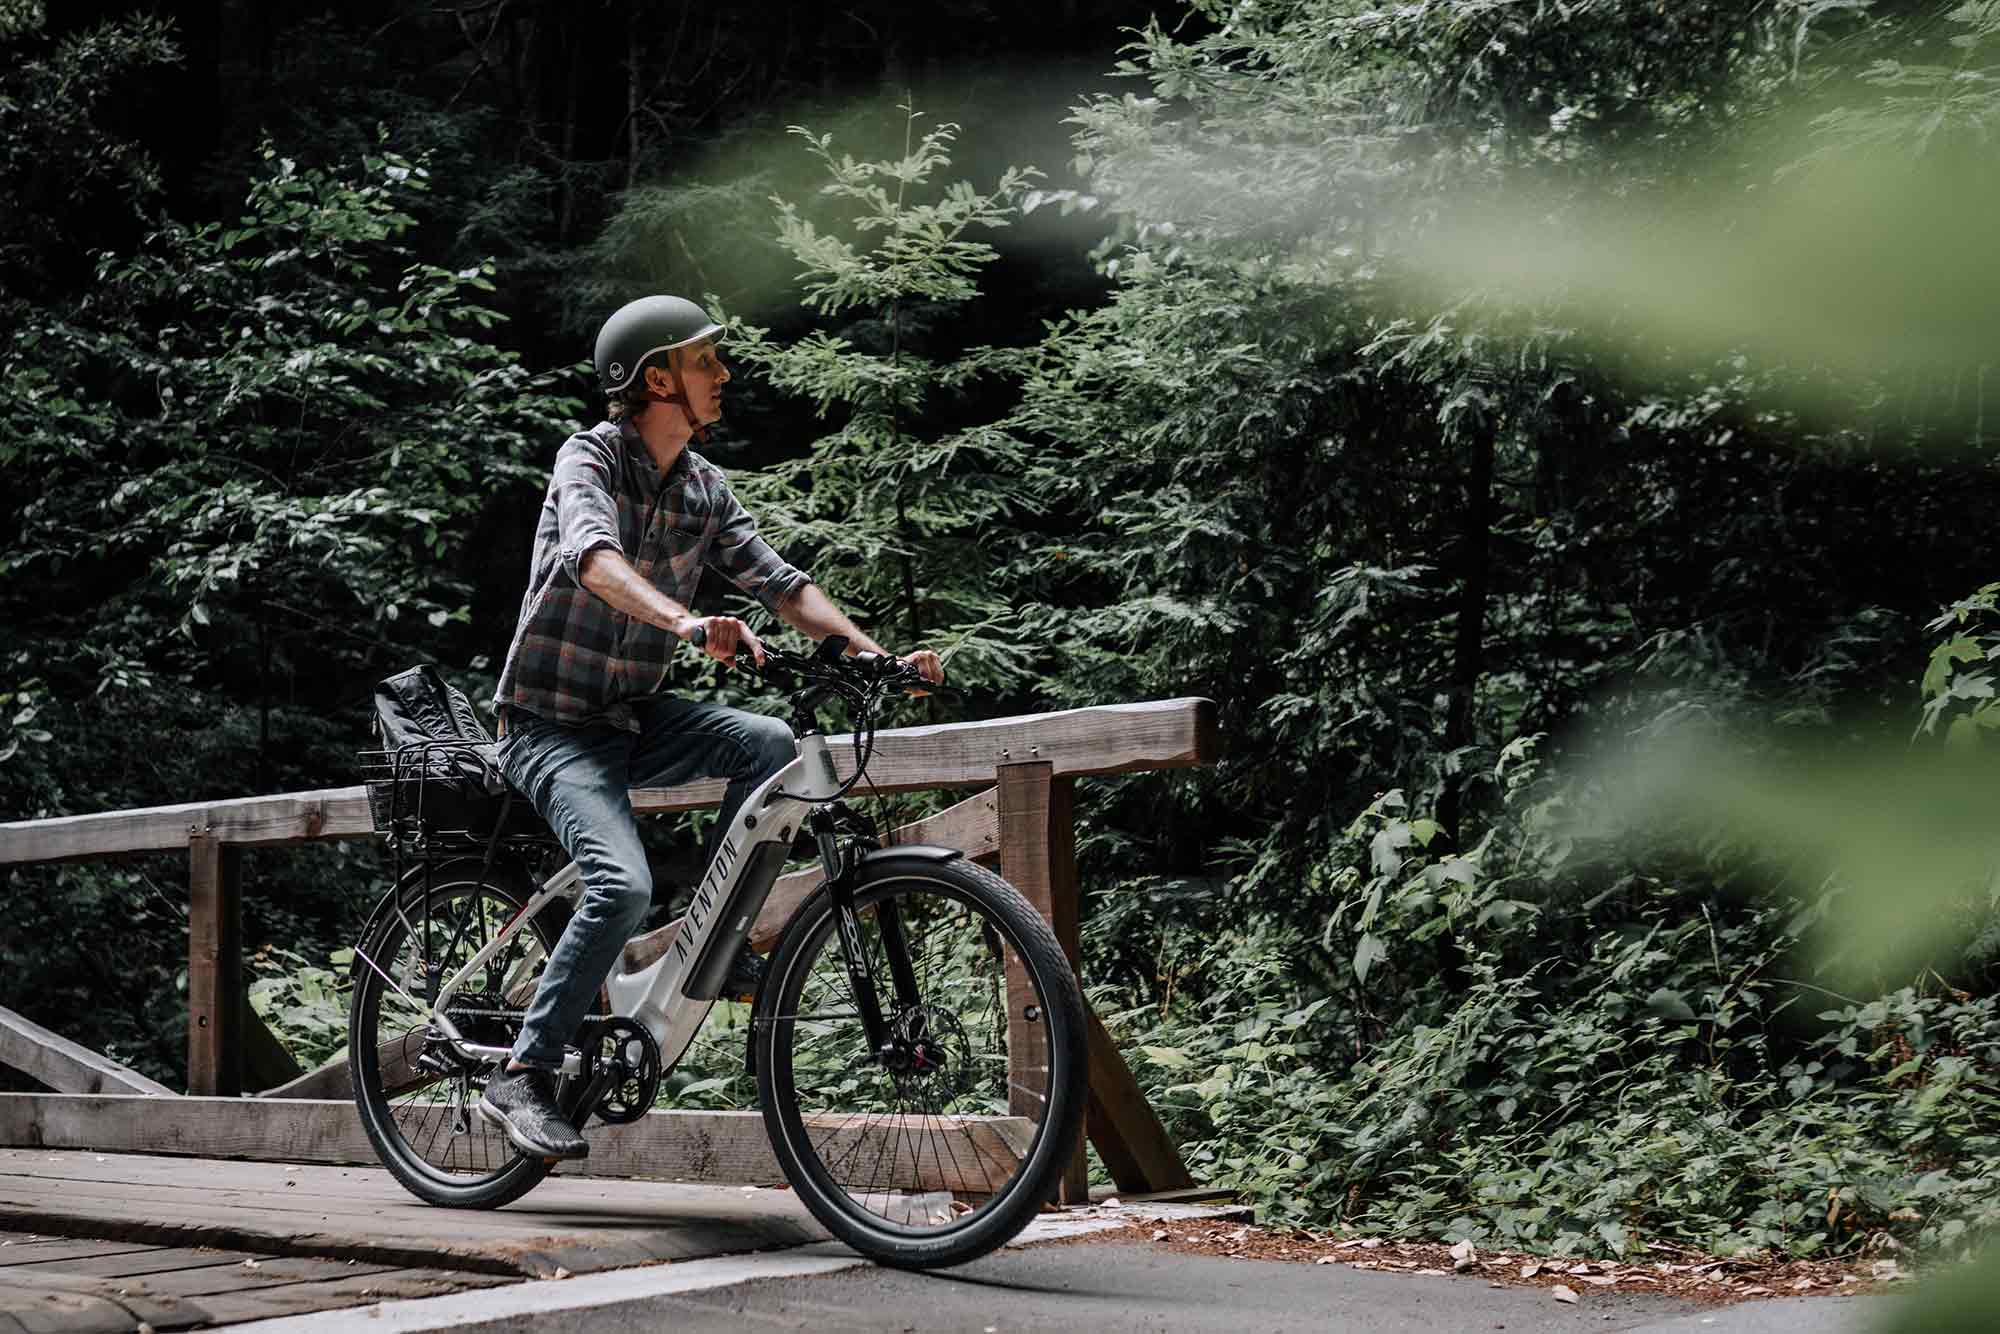 Speedy commuter or leisure cruiser? The Level.2 Step-Through can be both.